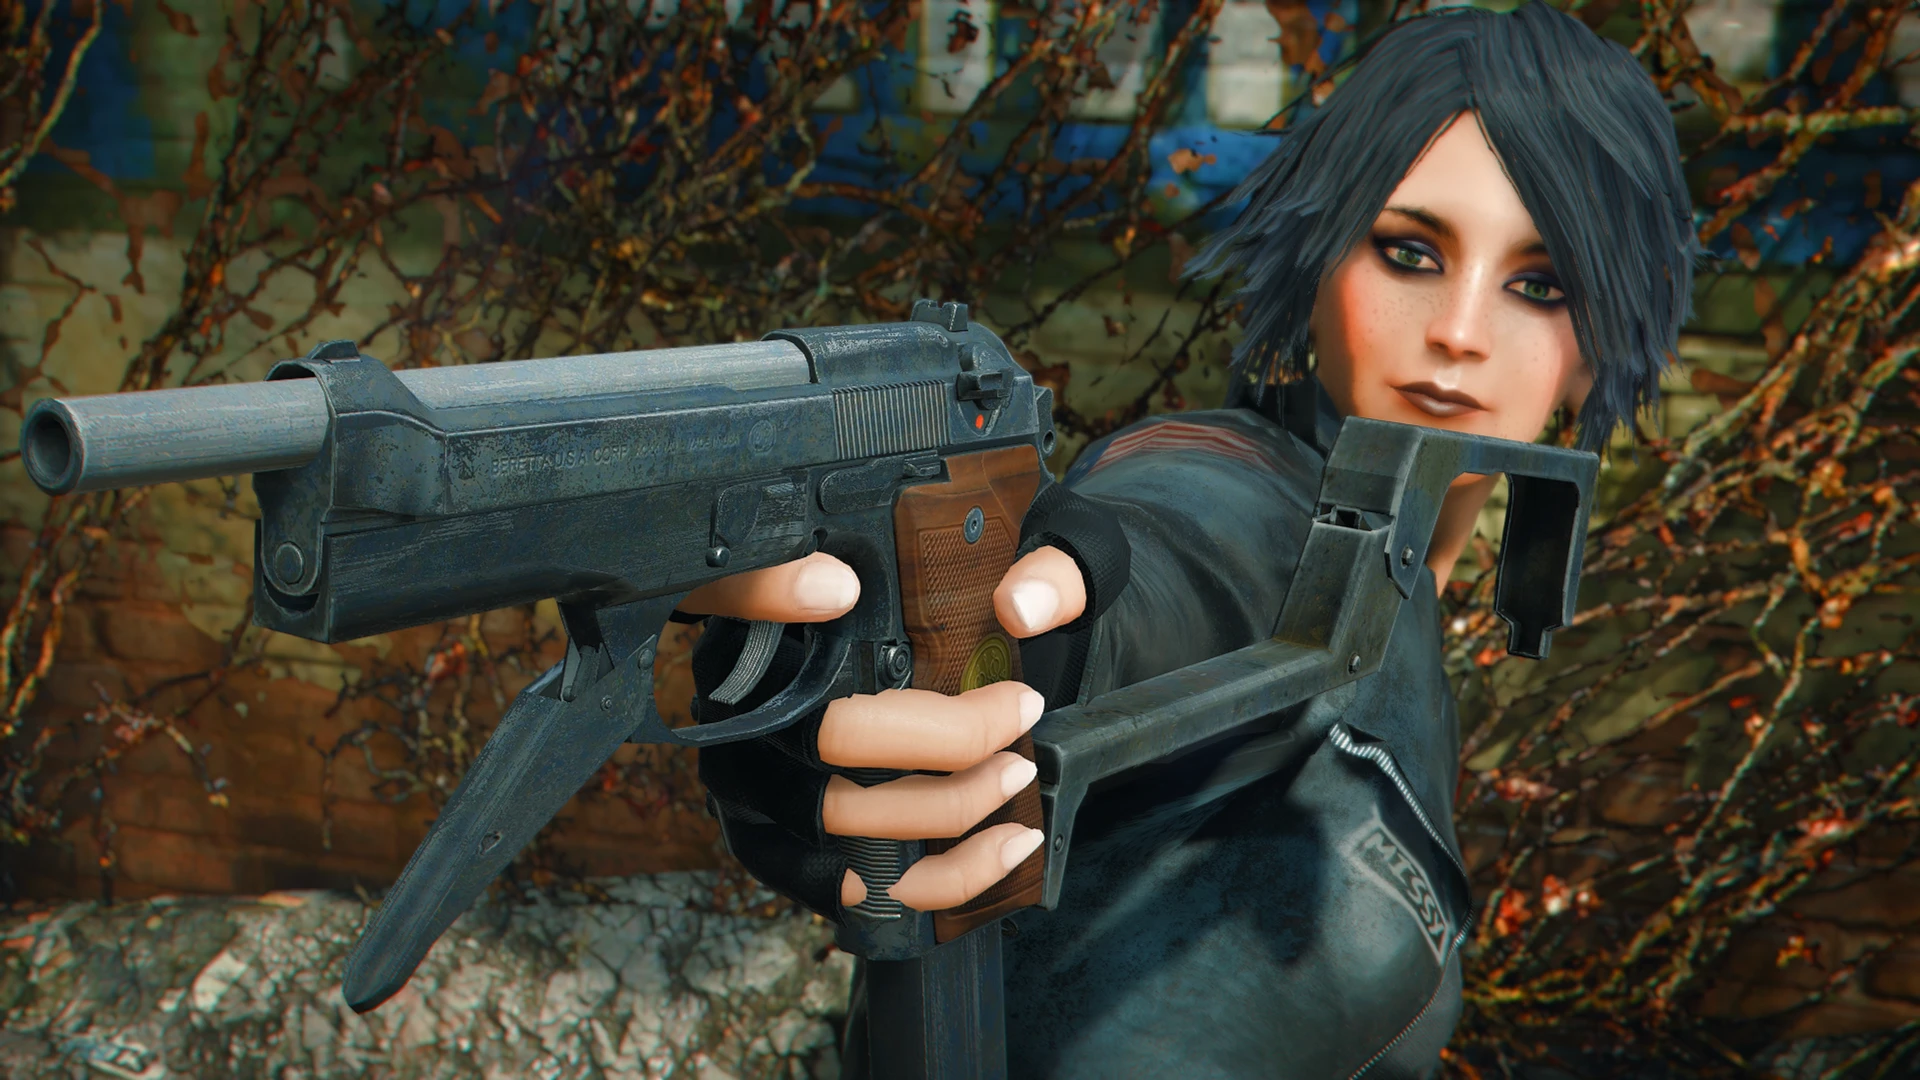 Service Pistol - Beretta 92 93r - Another Another Millenia at Fallout 4 ...